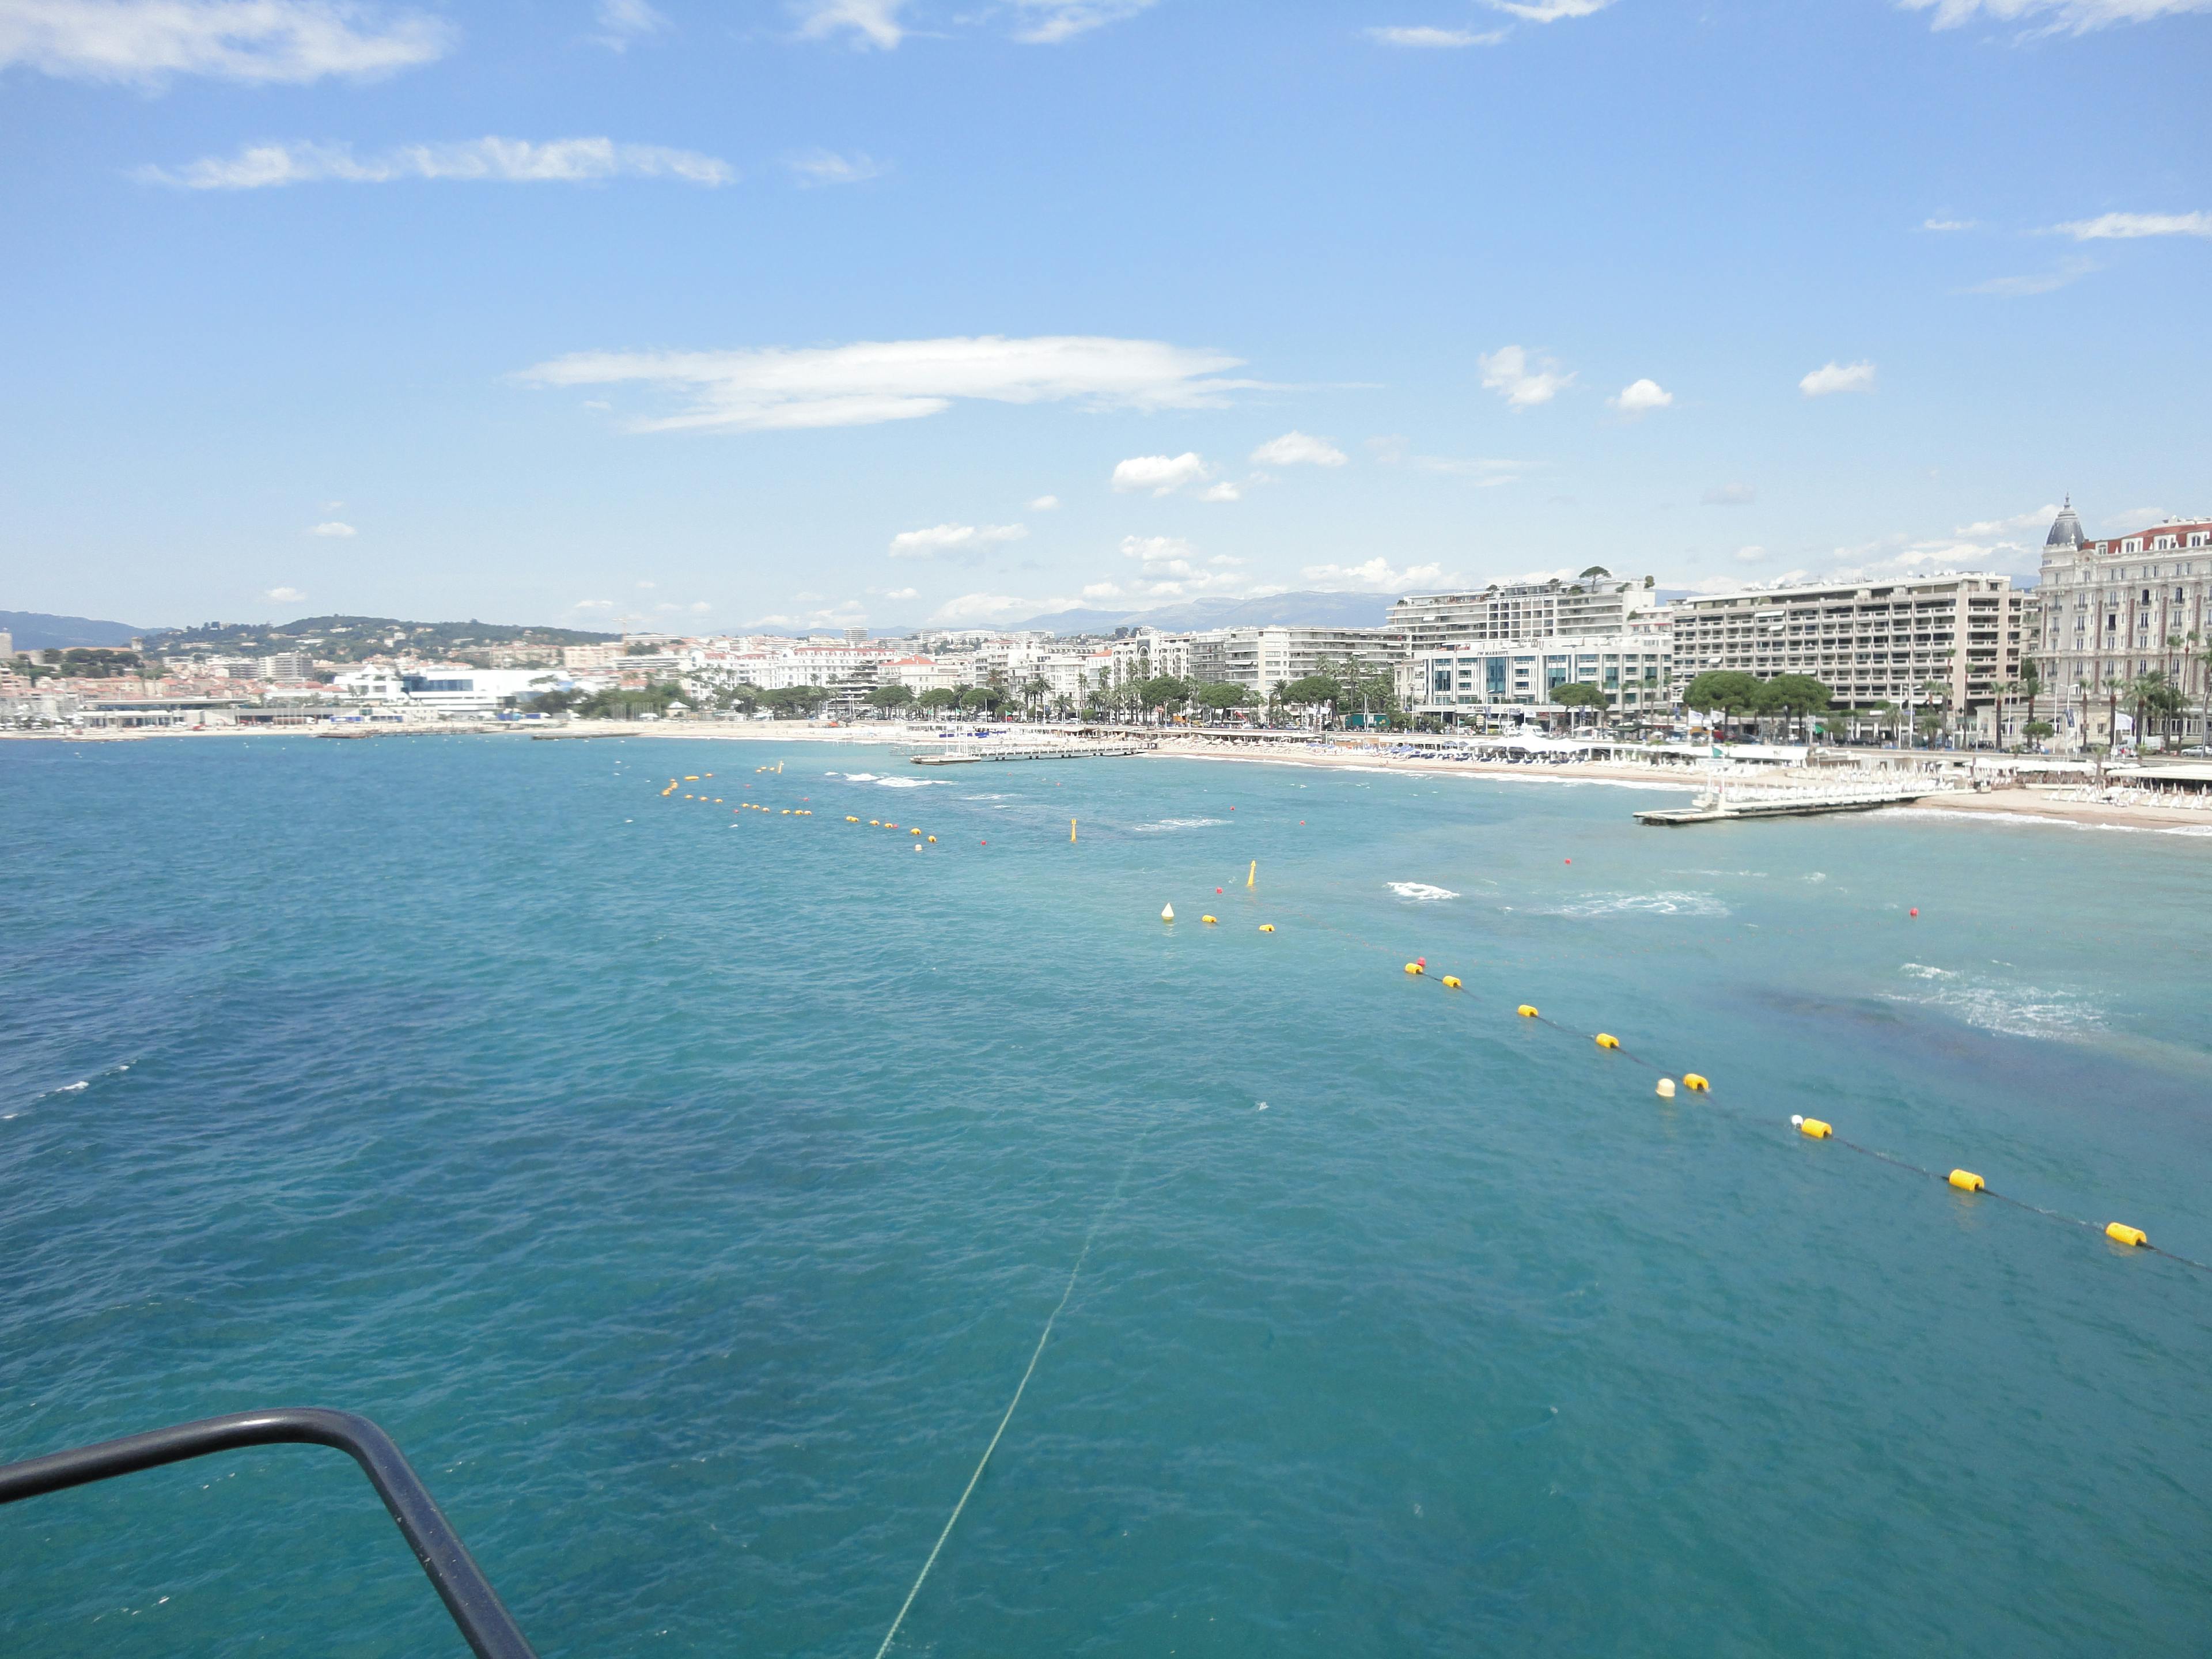 GEOTUBE systems played a crucial role in coastal protection for Cannes' iconic La Croisette beach, ensuring resilience and uninterrupted beachside experiences.